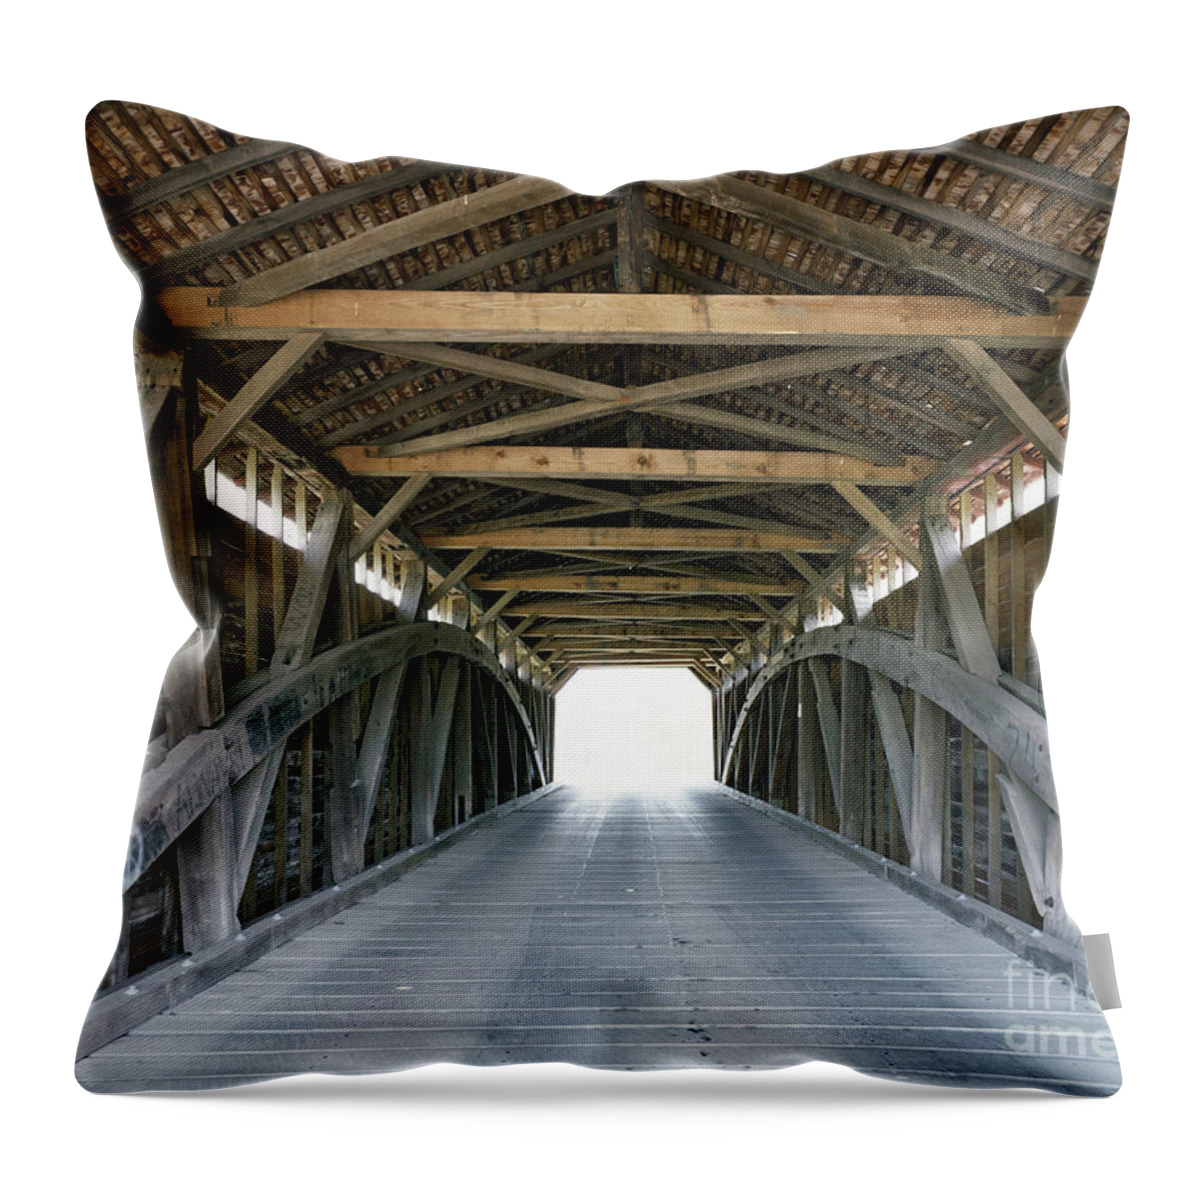 1850 Throw Pillow featuring the photograph The Utica Mills Covered Bridge, Maryland by Carol Highsmith